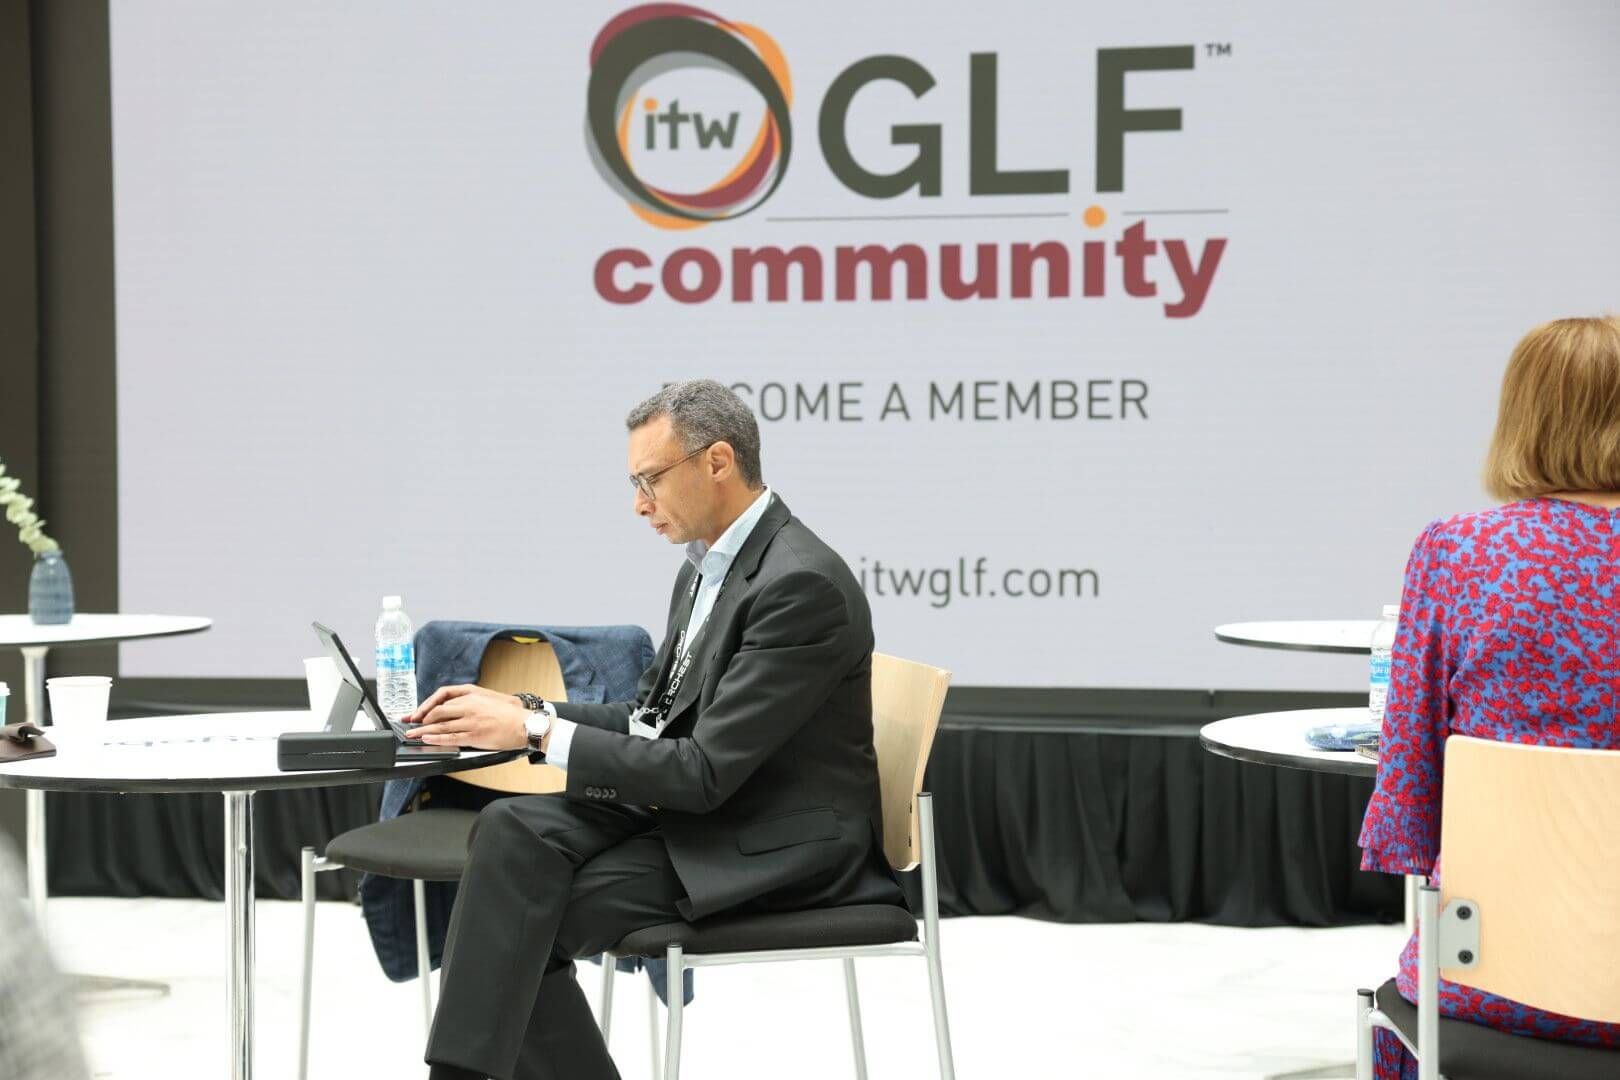 ITW GLF report says non-gender diversity not given enough focus by industry